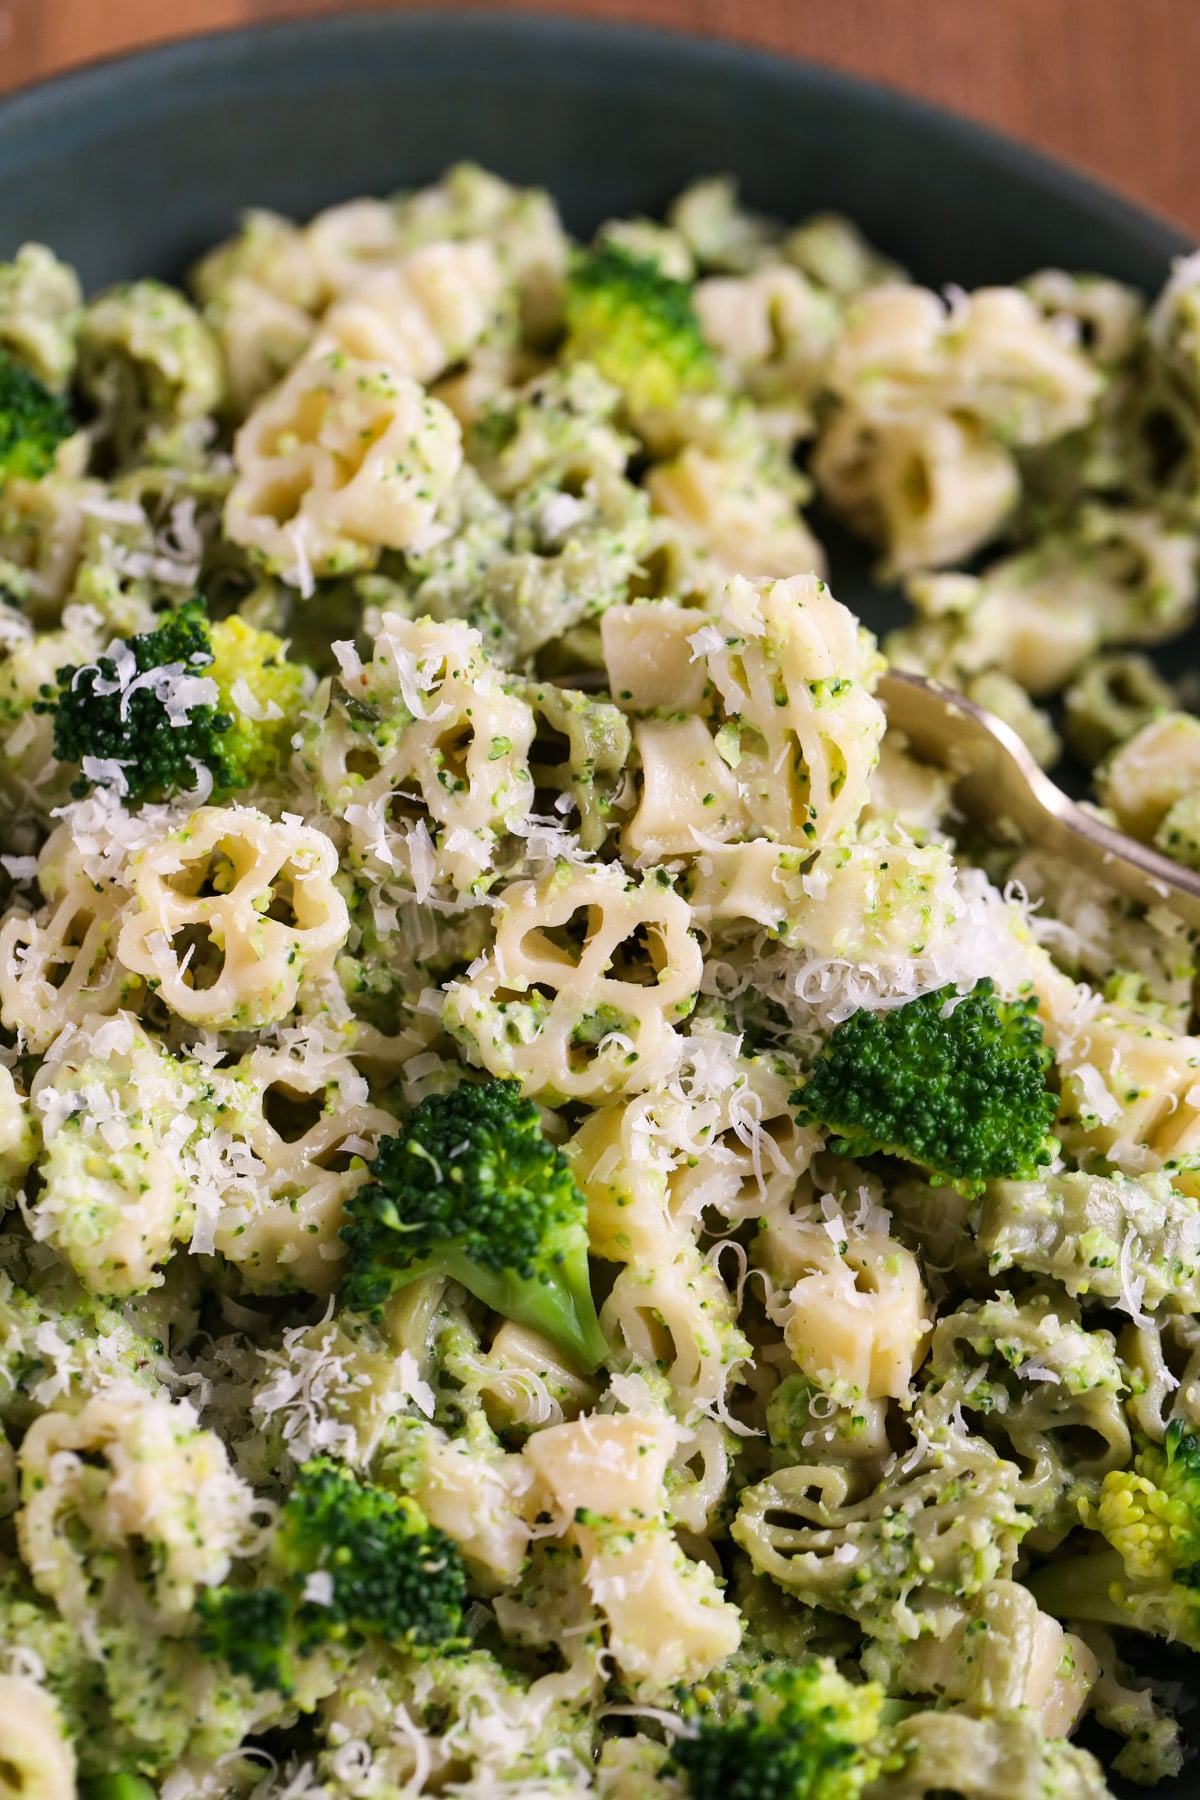 Very tight shot of finished pasta showing off shapes and fresh Parmesan and broccoli